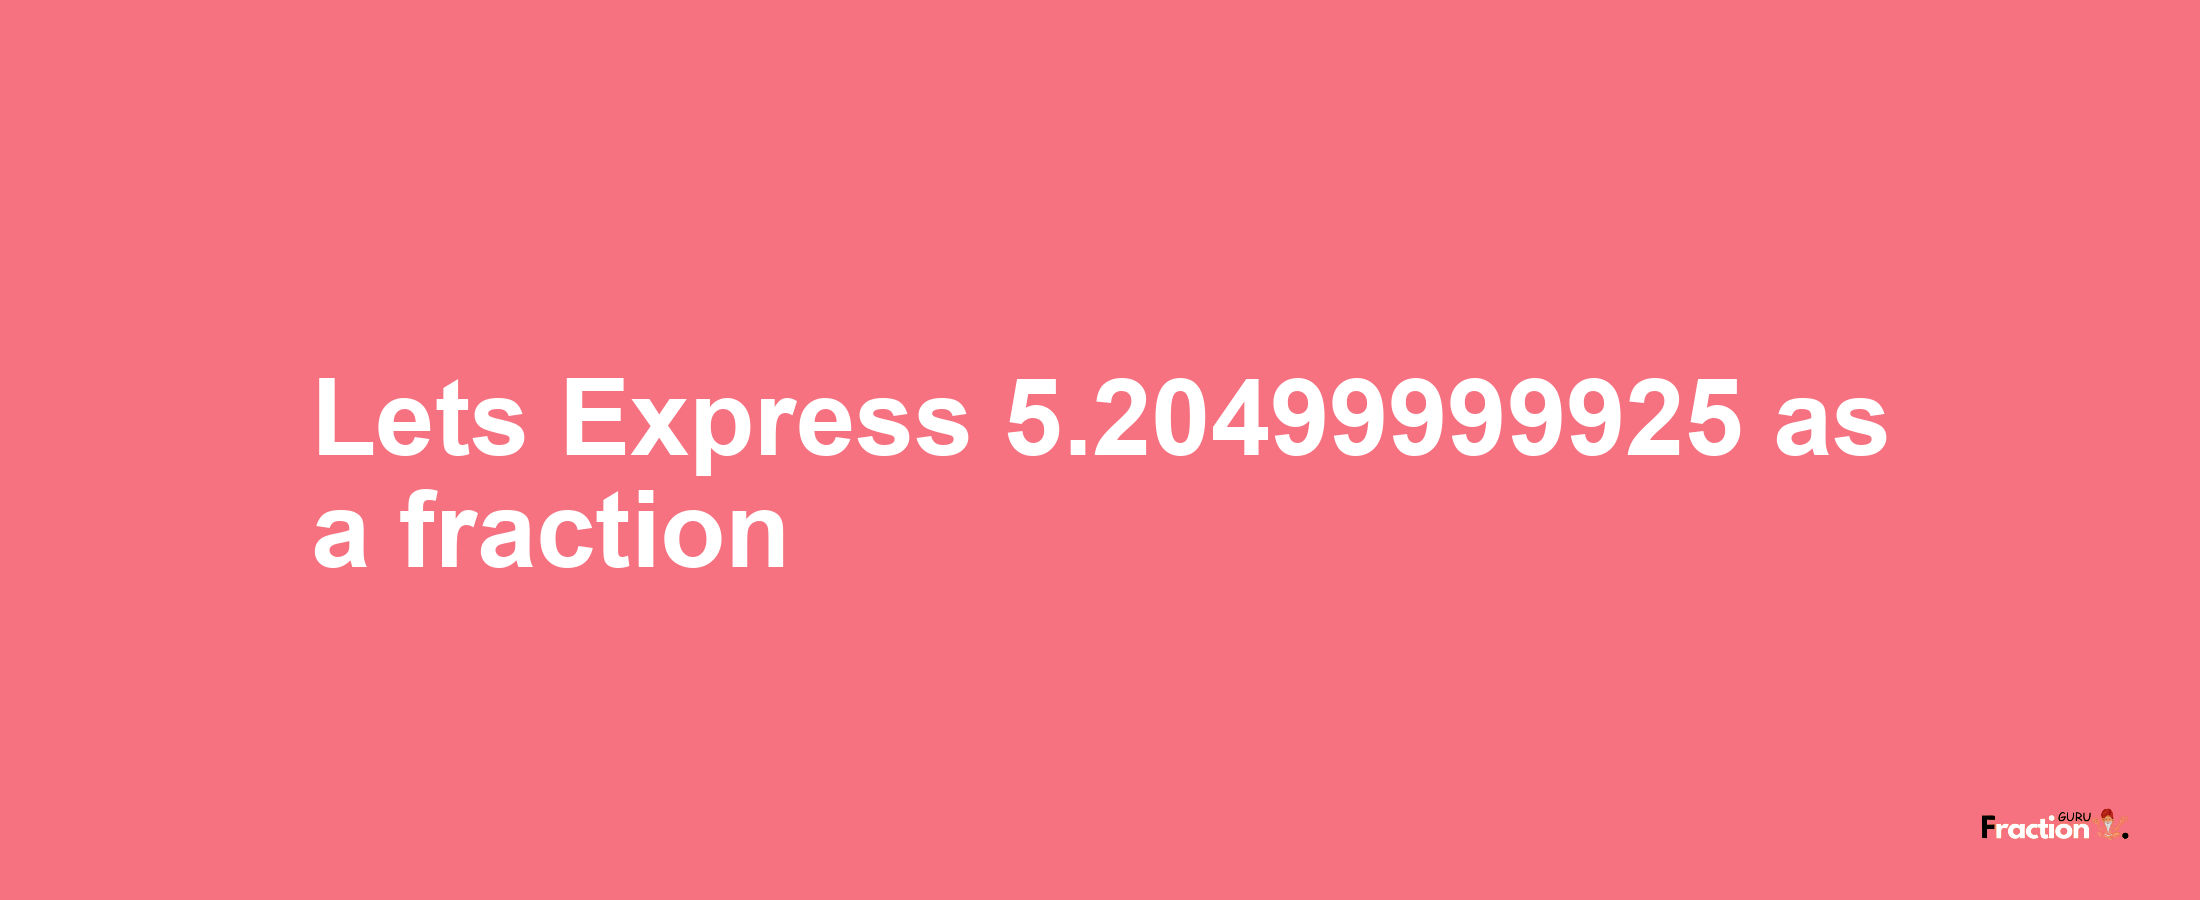 Lets Express 5.20499999925 as afraction